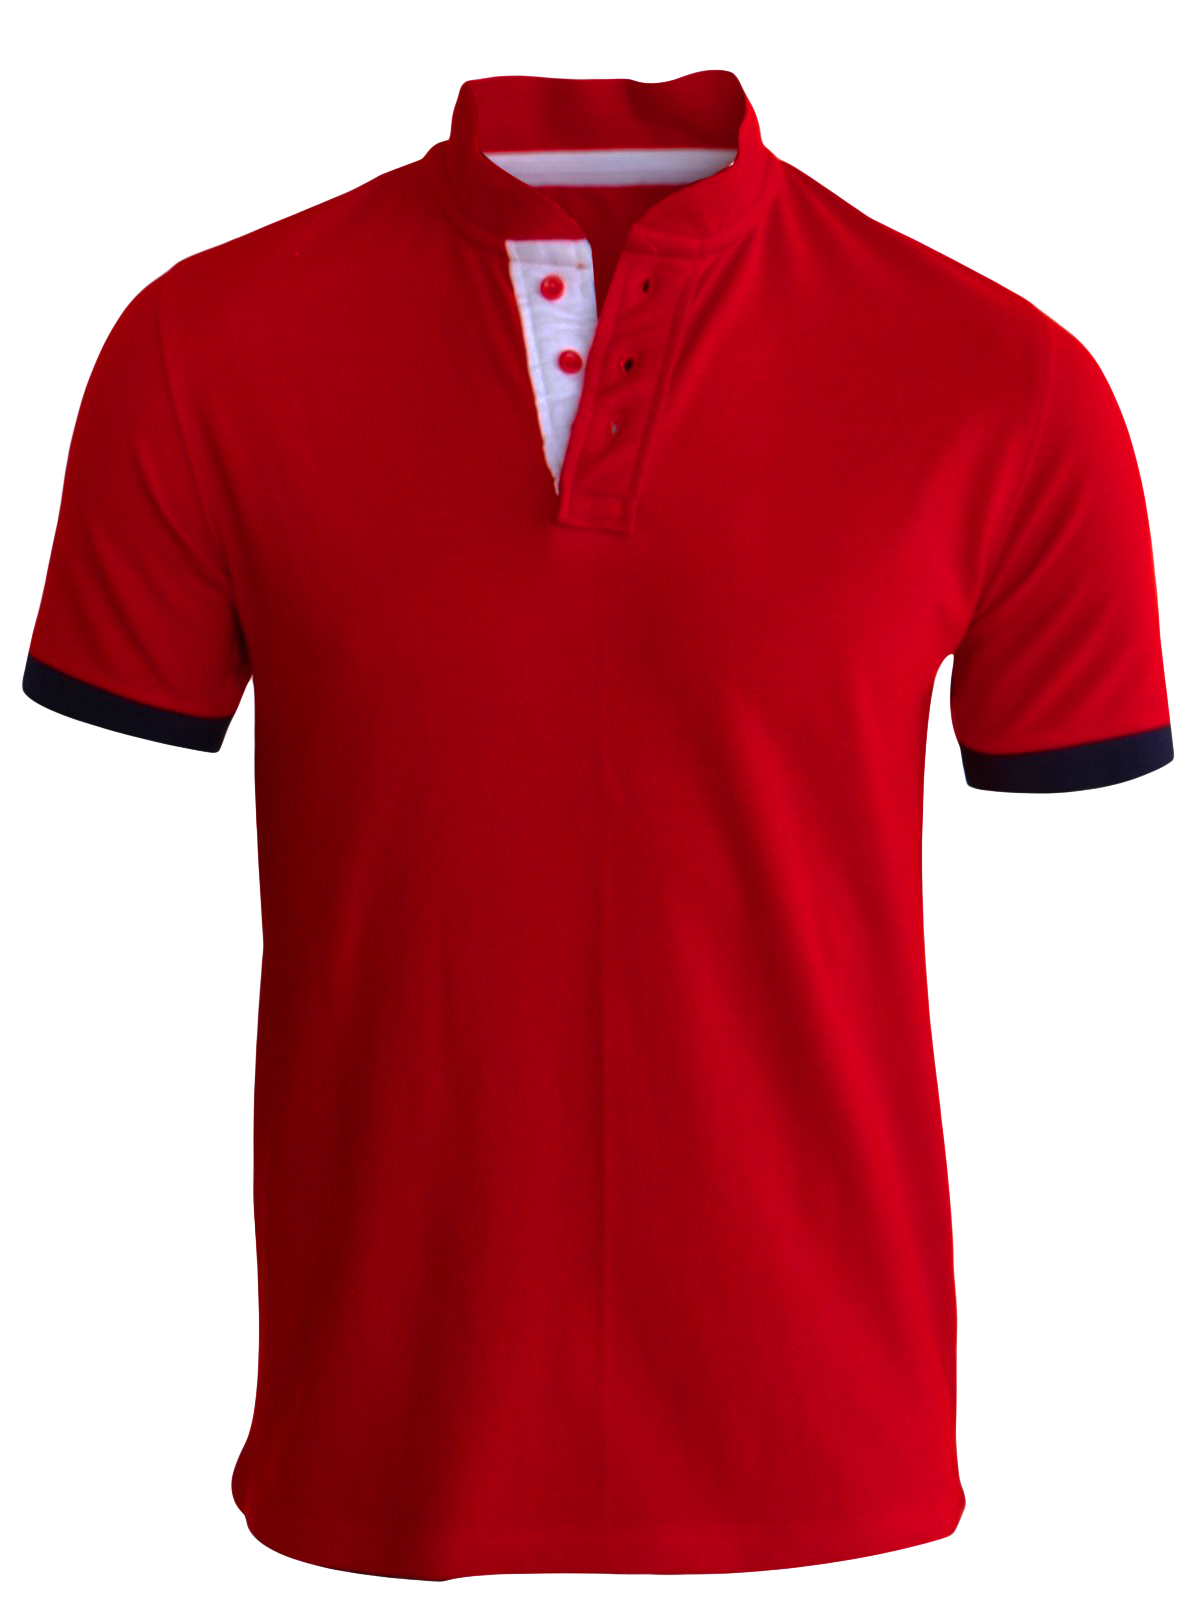 Red T-Shirt PNG Image - PurePNG | Free transparent CC0 PNG Image Library